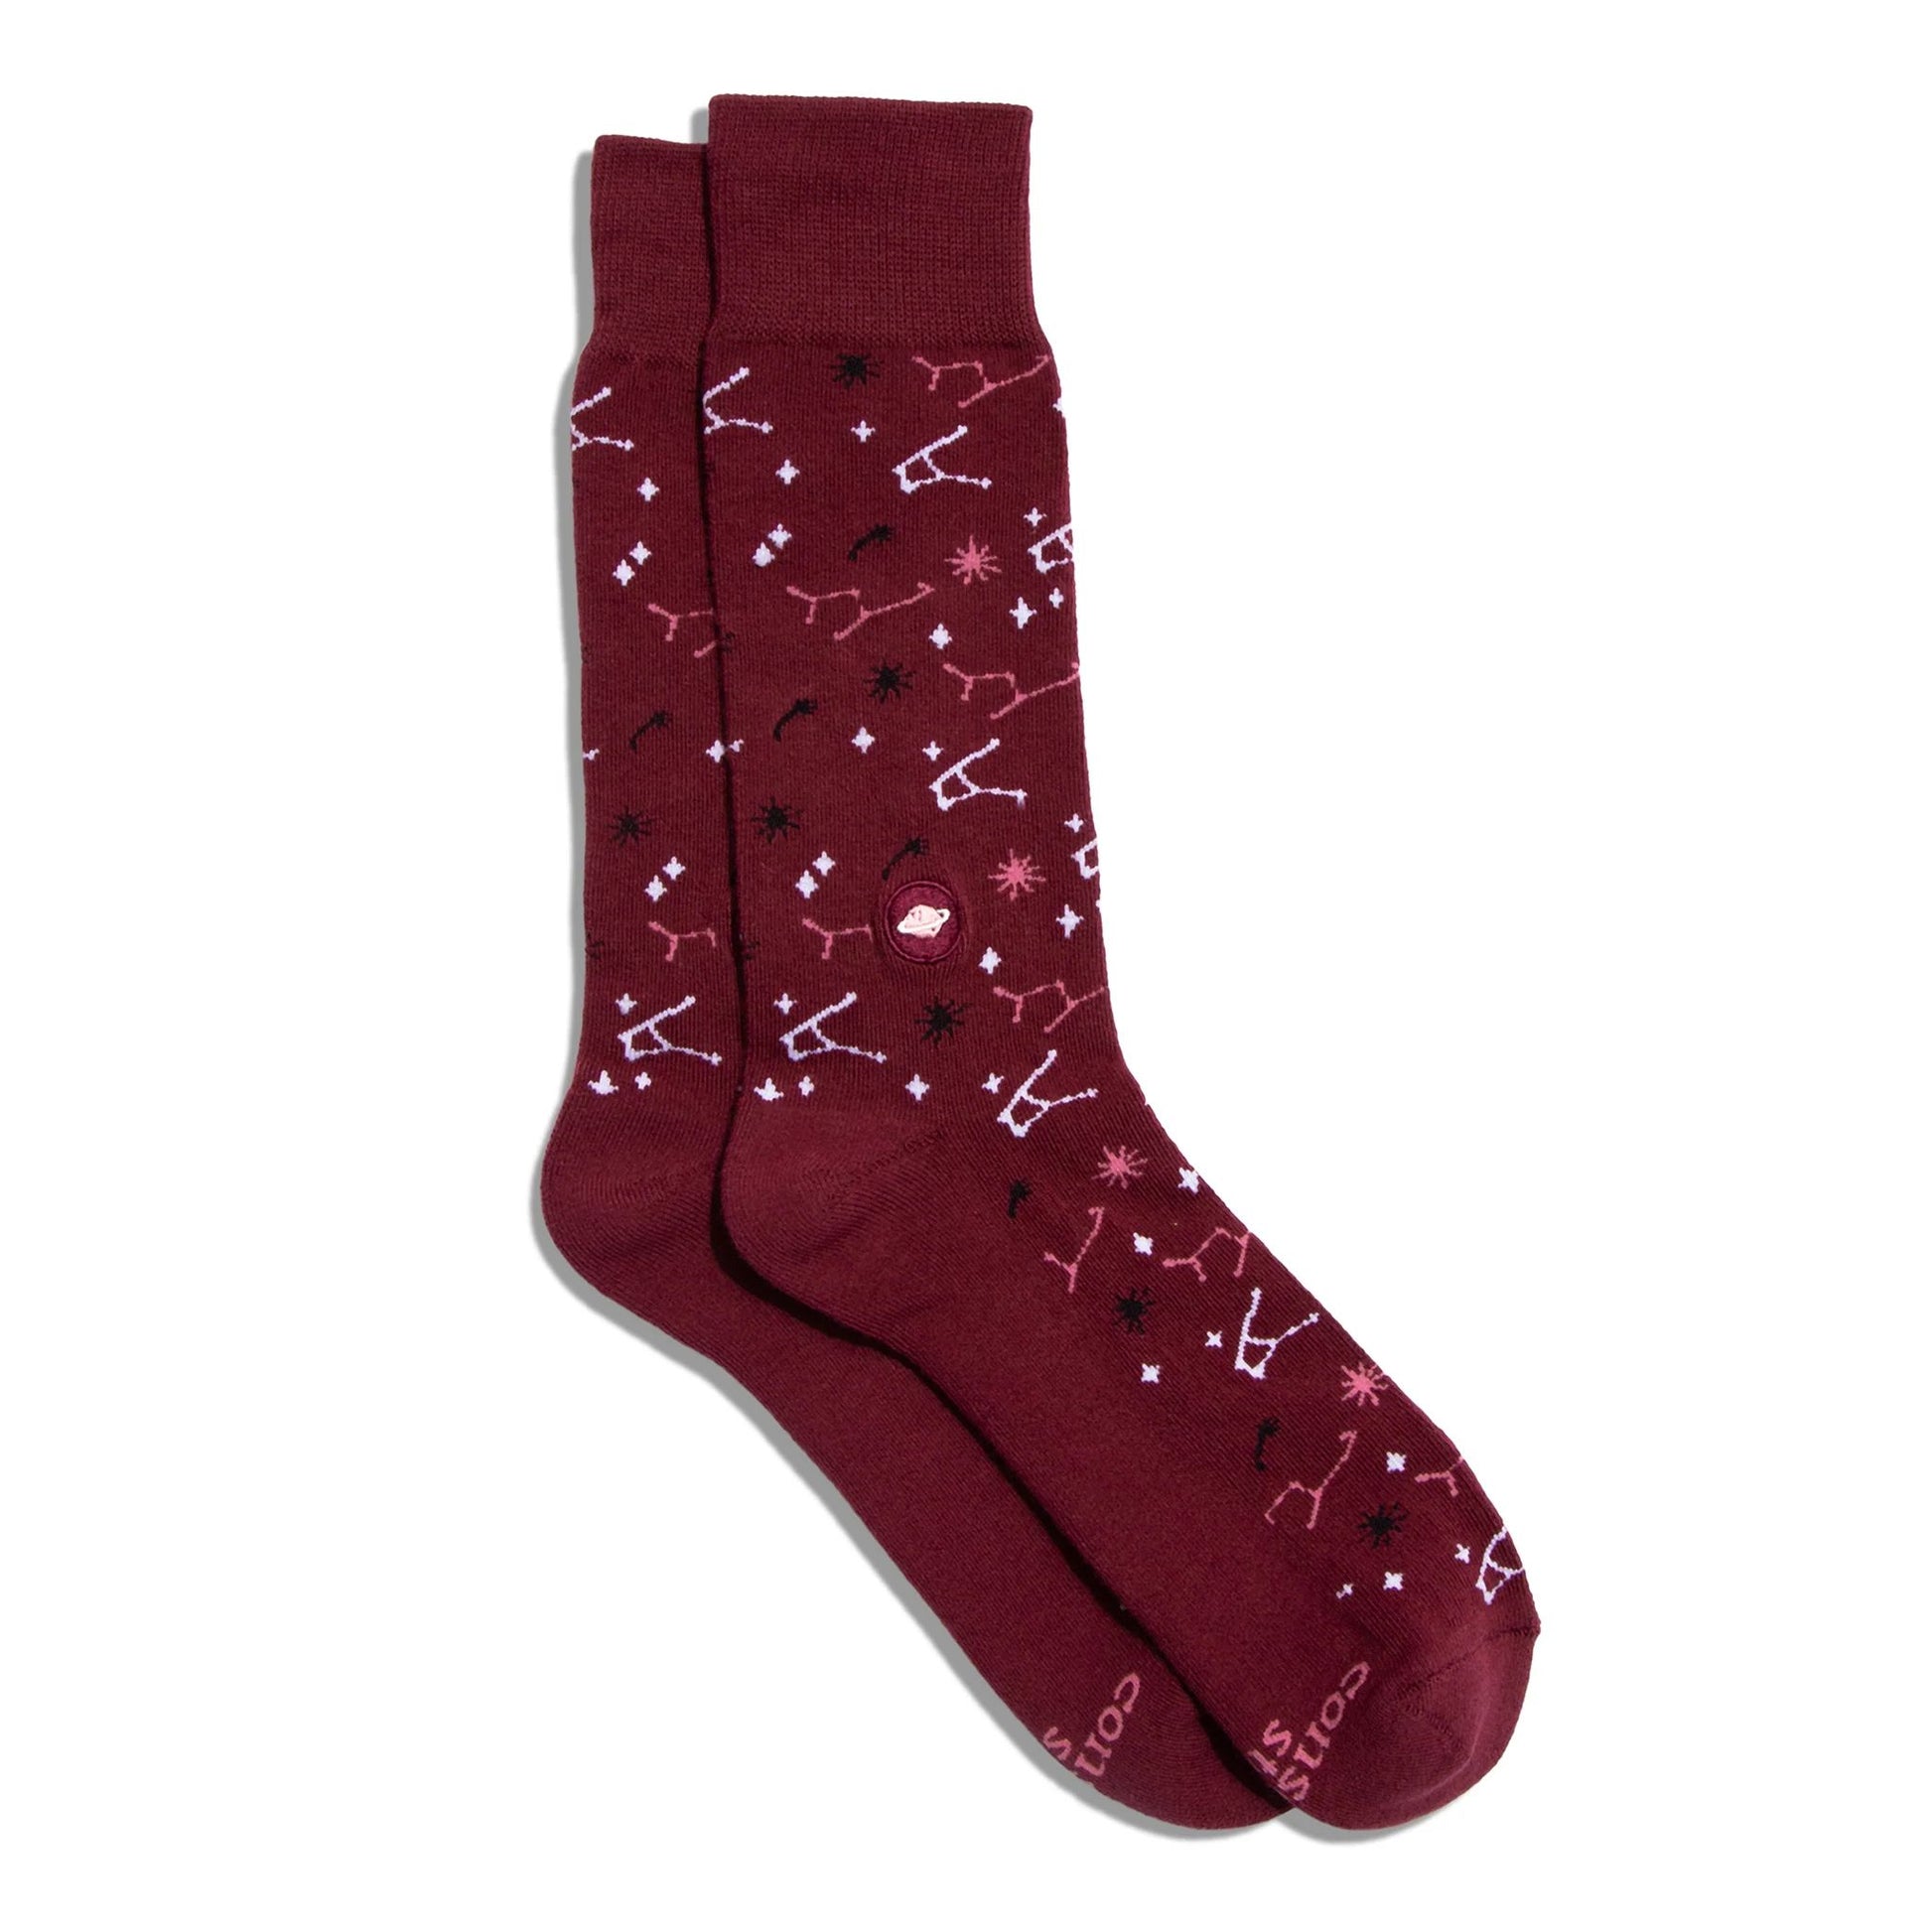 Men's Socks That Support Space Exploration - Maroon Constellations | Fair Trade | Fits Men's Sizes 8.5-13